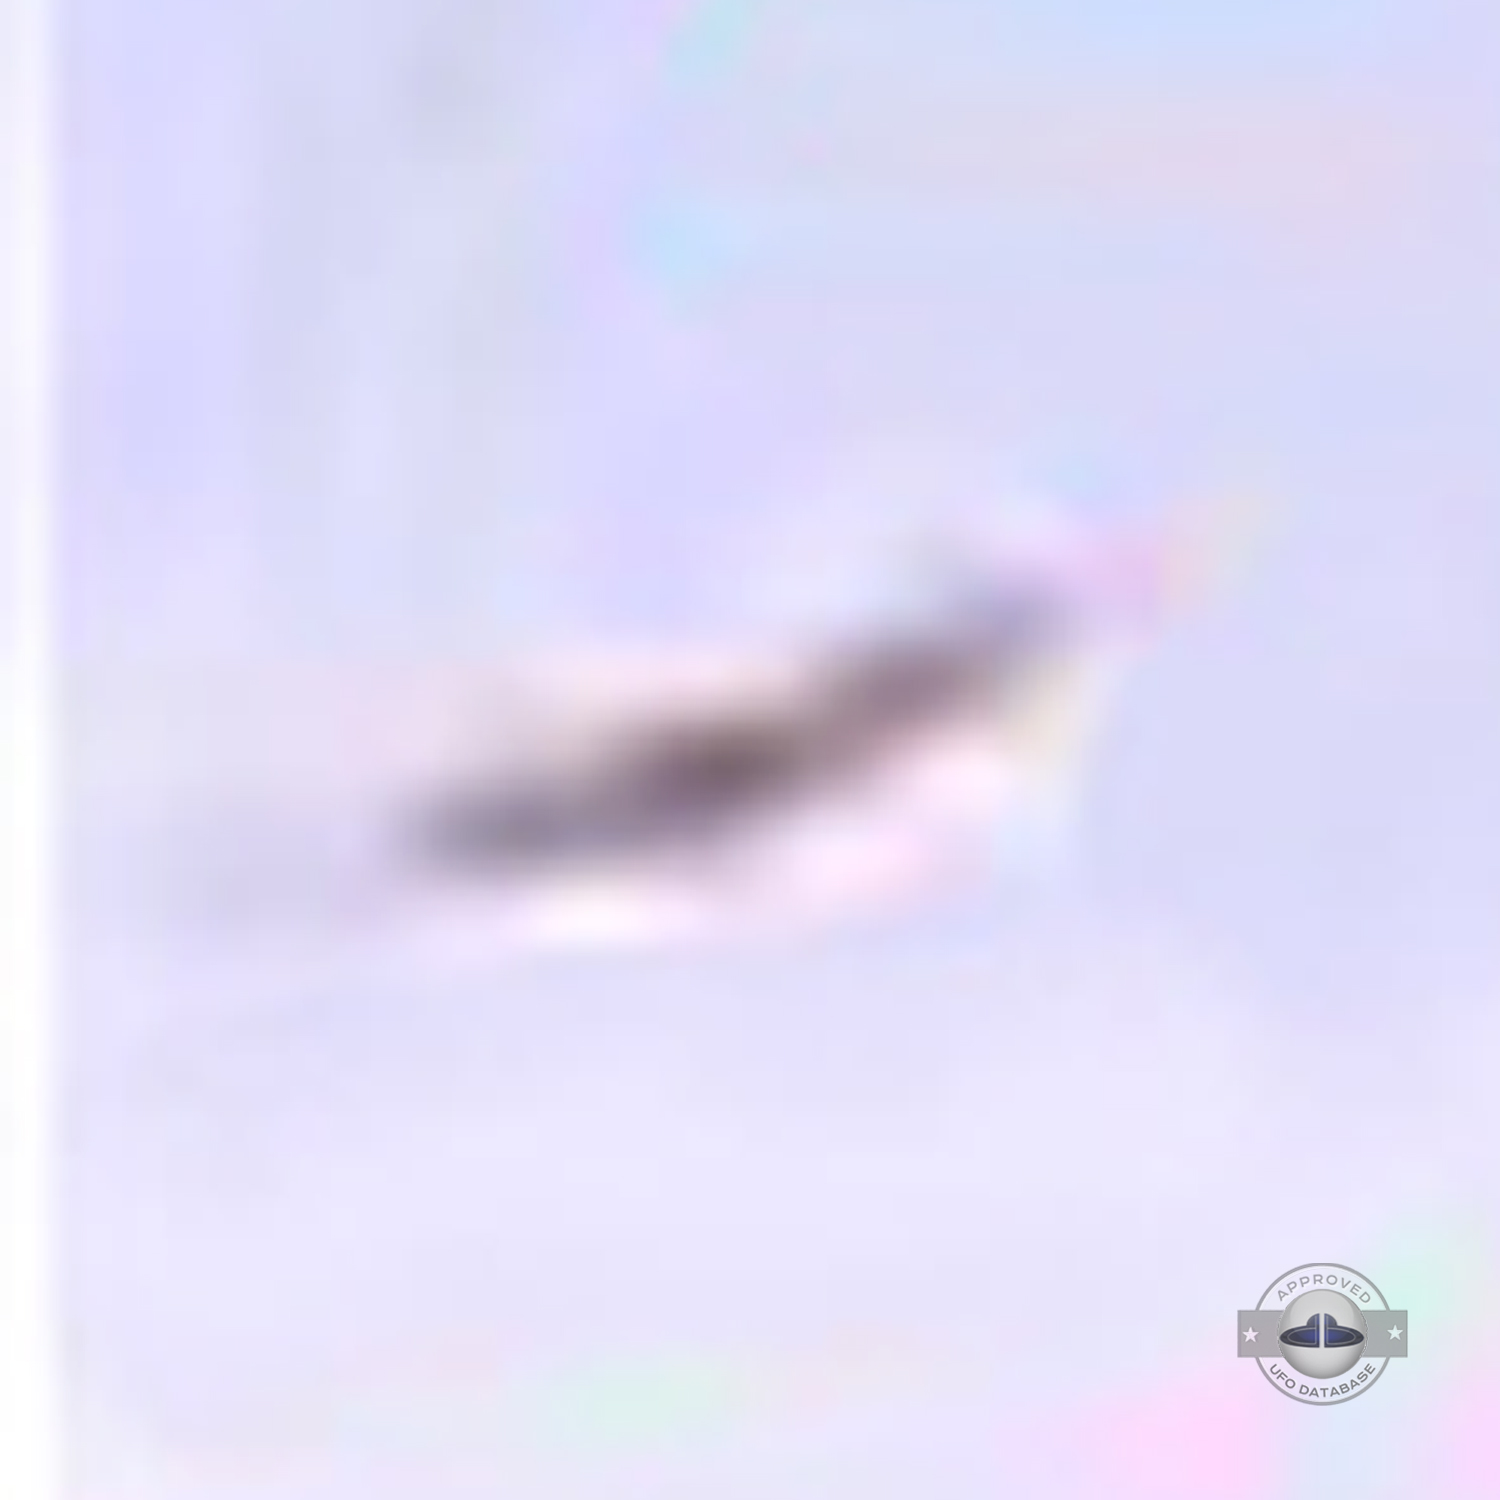 UFO seen passing over Kids in Baghdad, Iraq | April 03 2004 UFO Picture #199-5